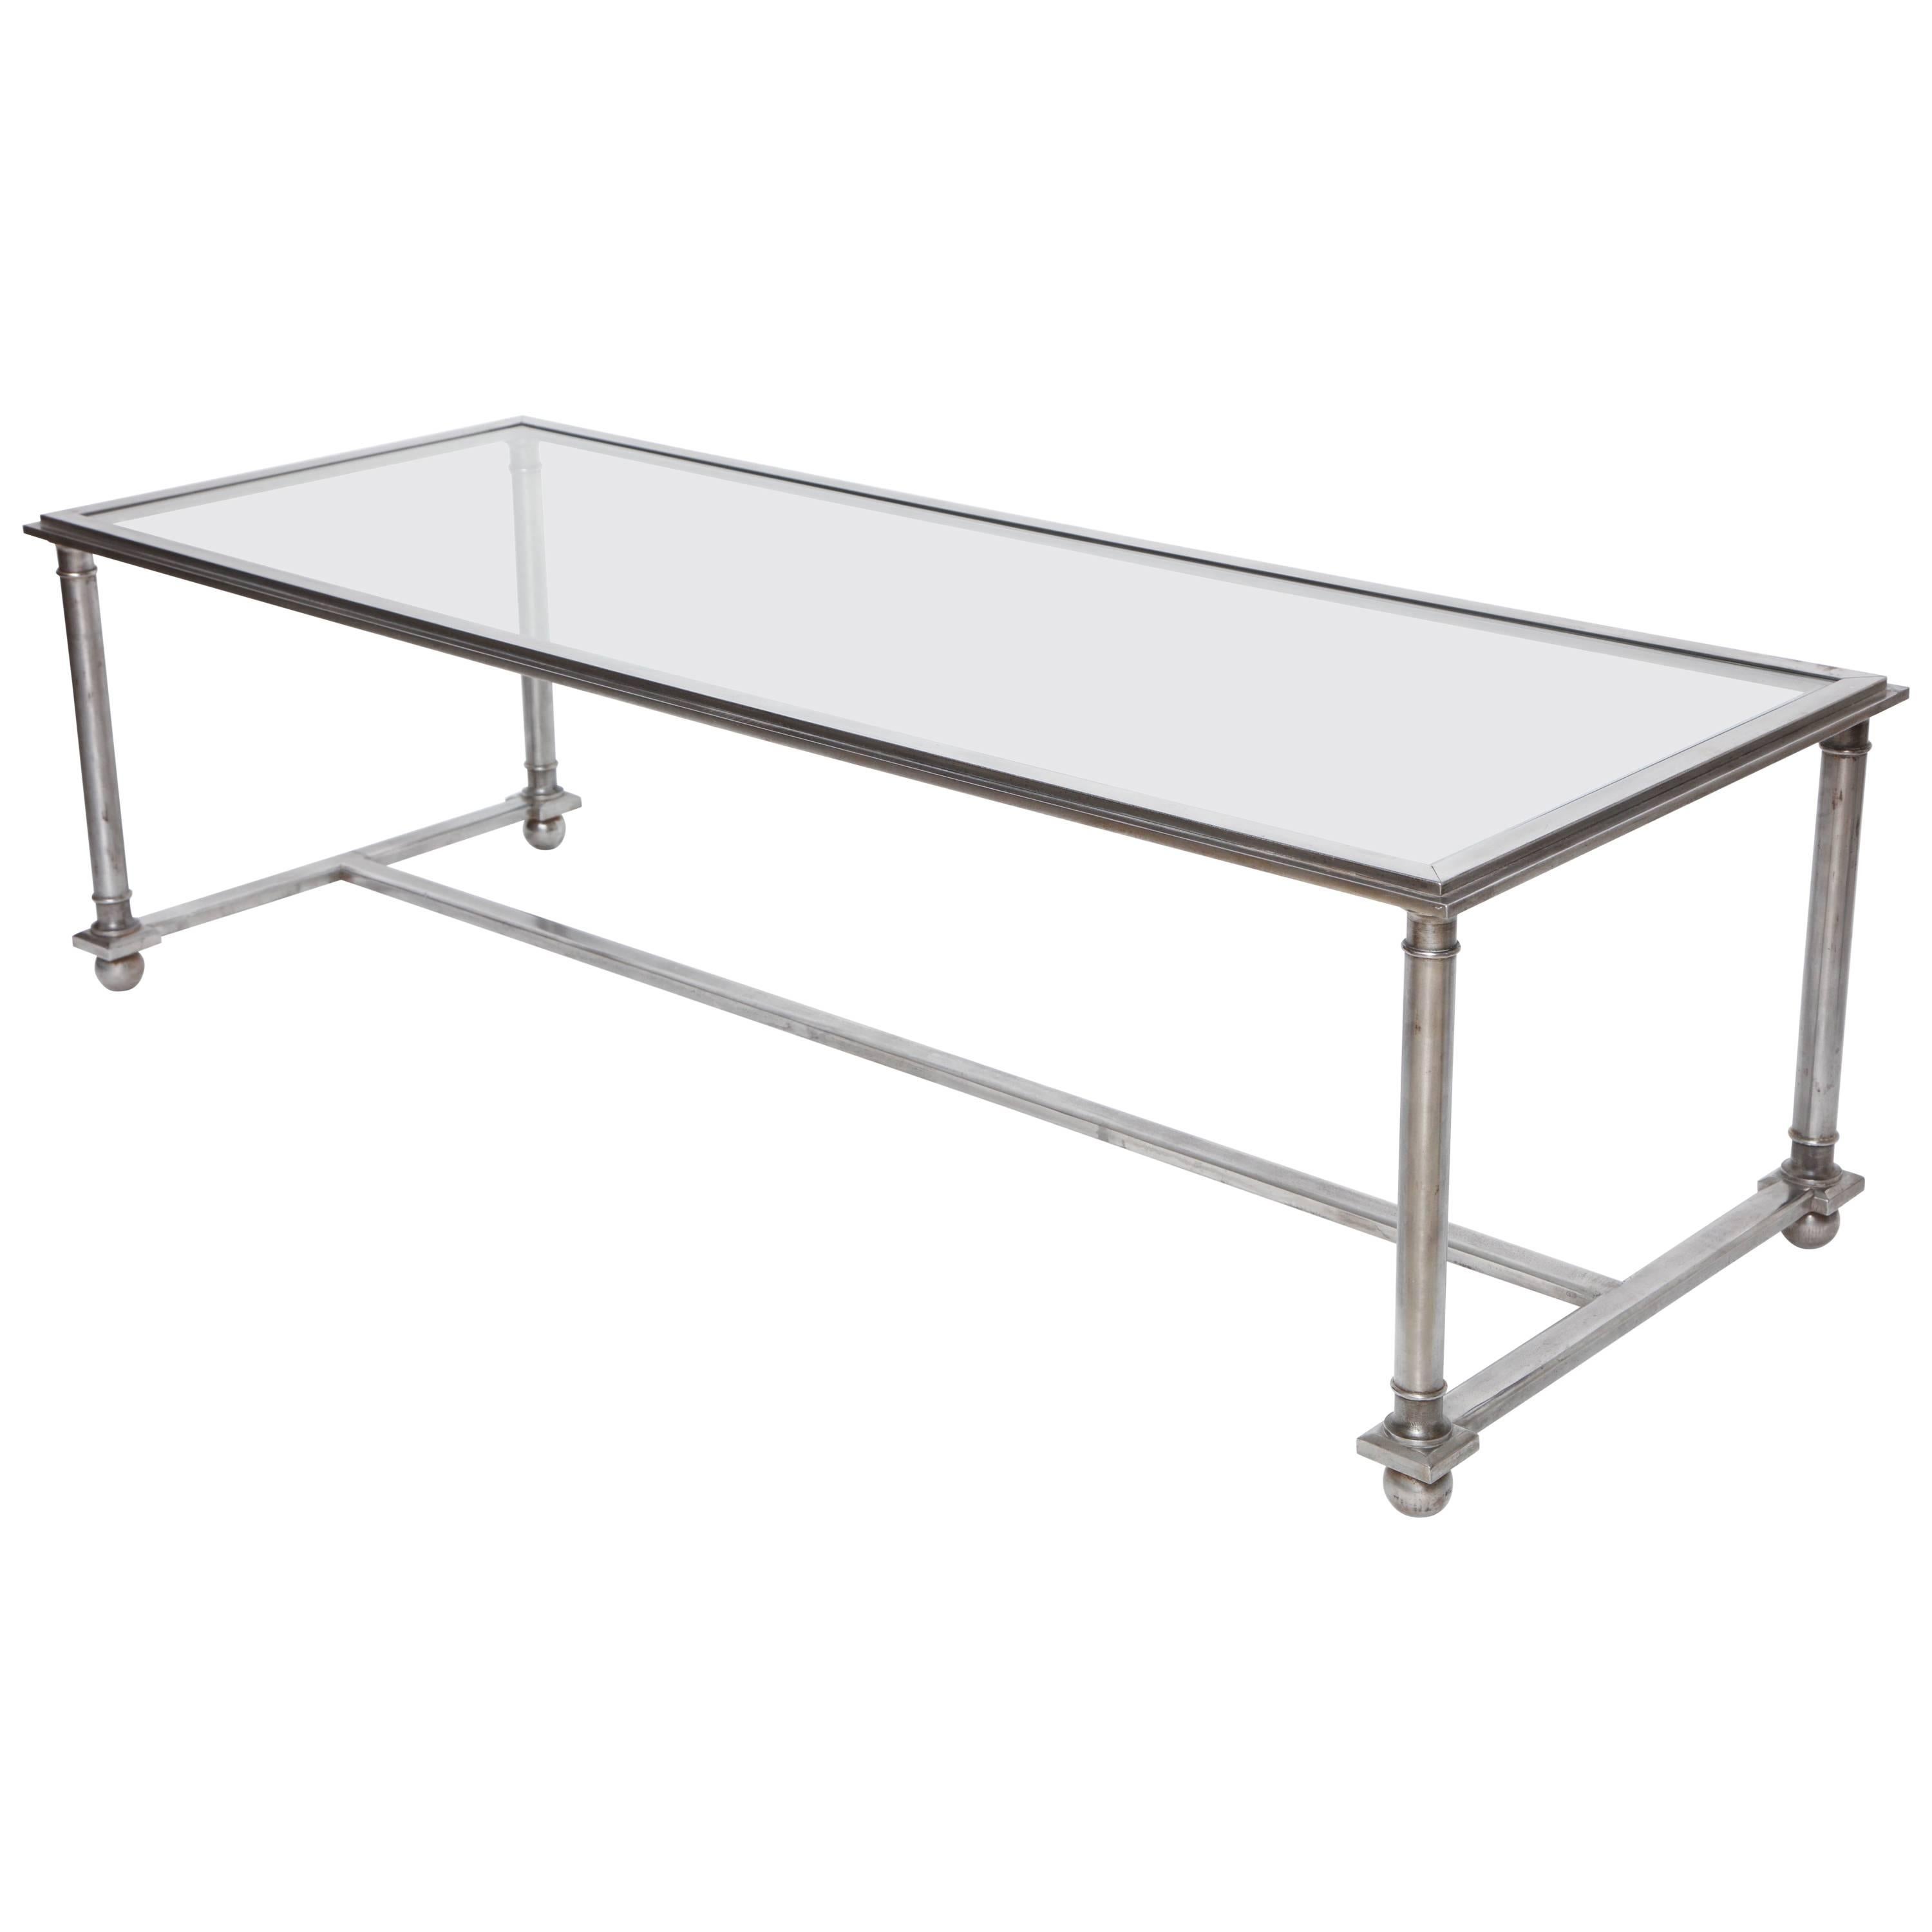 Midcentury Rectangular Steel Coffee Table with Glass Top, France, circa 1960s